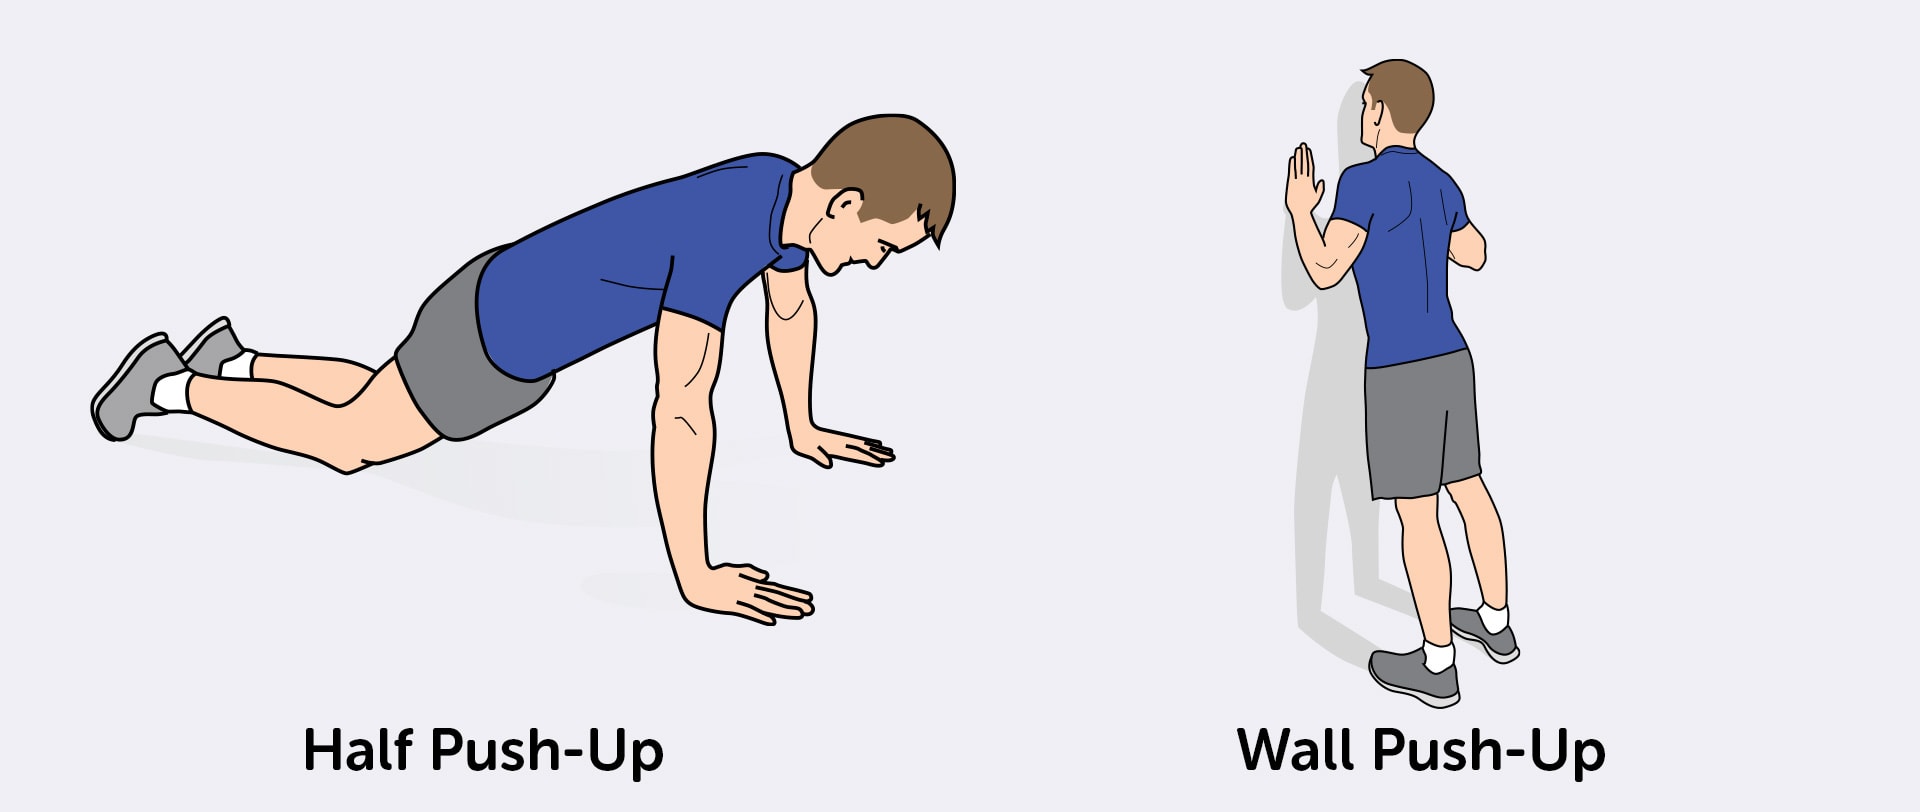 Half push-ups and wall push-ups are an easier alternative for beginners.